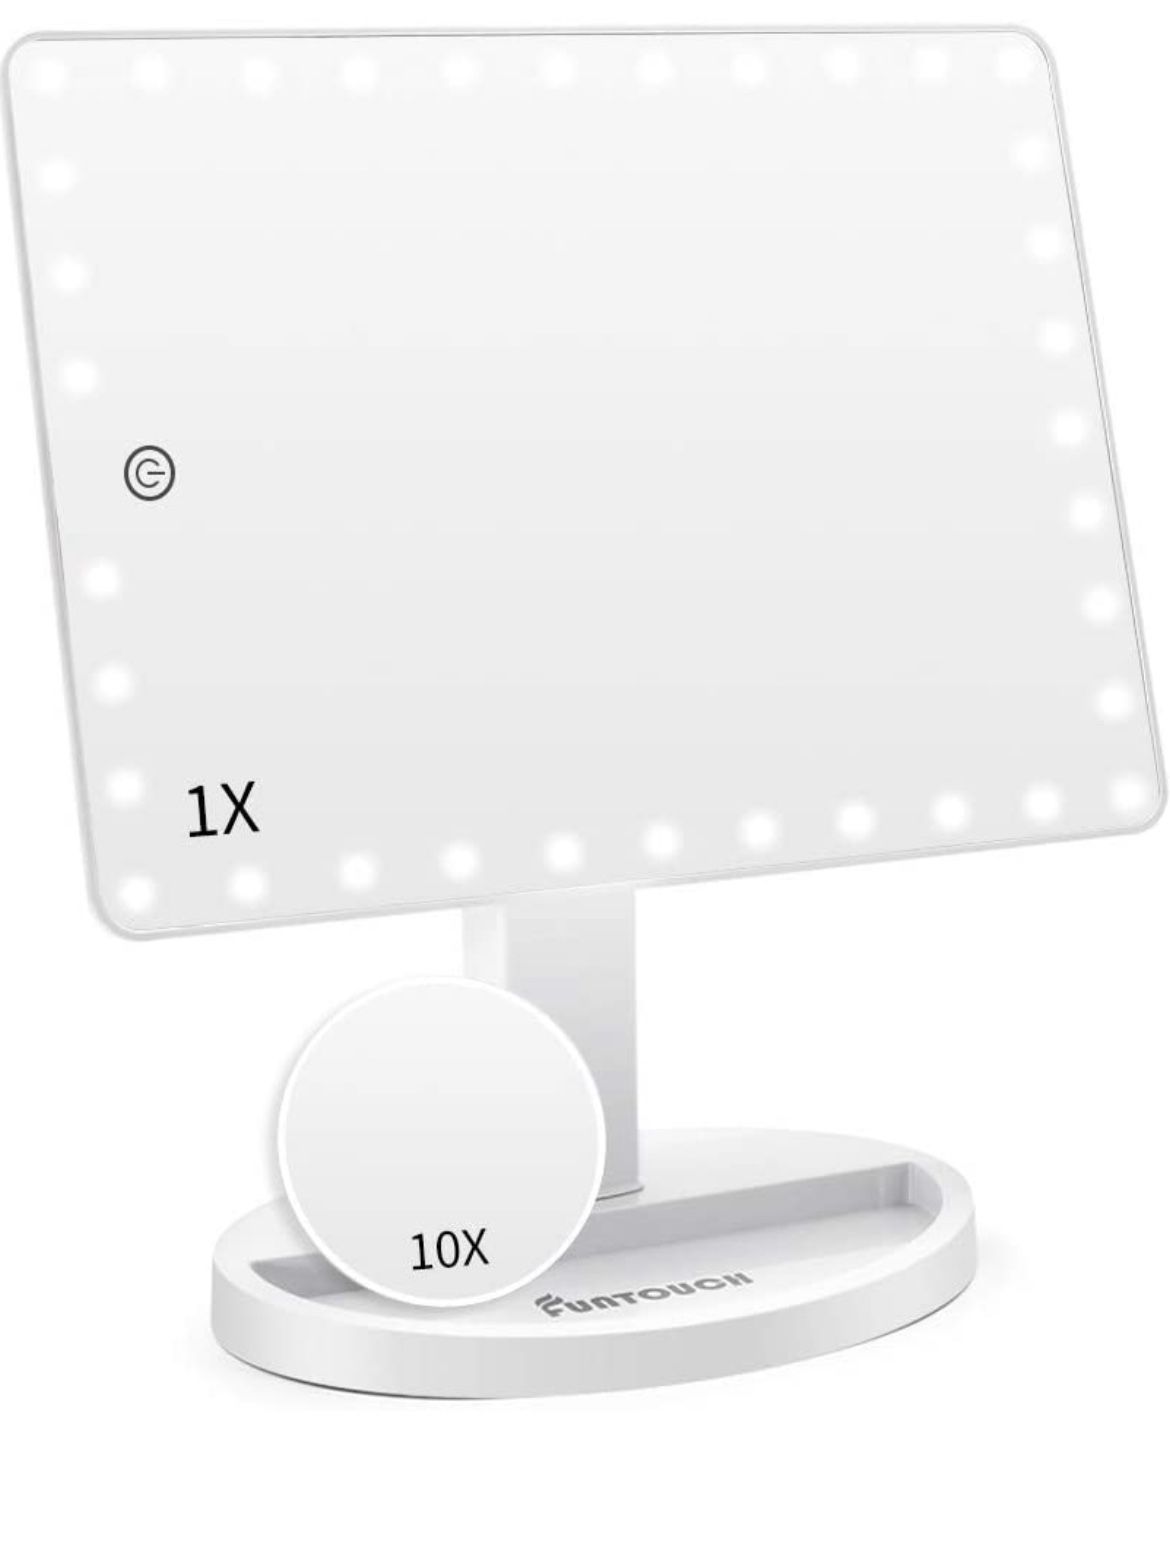 Large Lighted Vanity Makeup Mirror (X-Large Model), Funtouch Light Up Mirror with 35 LED Lights